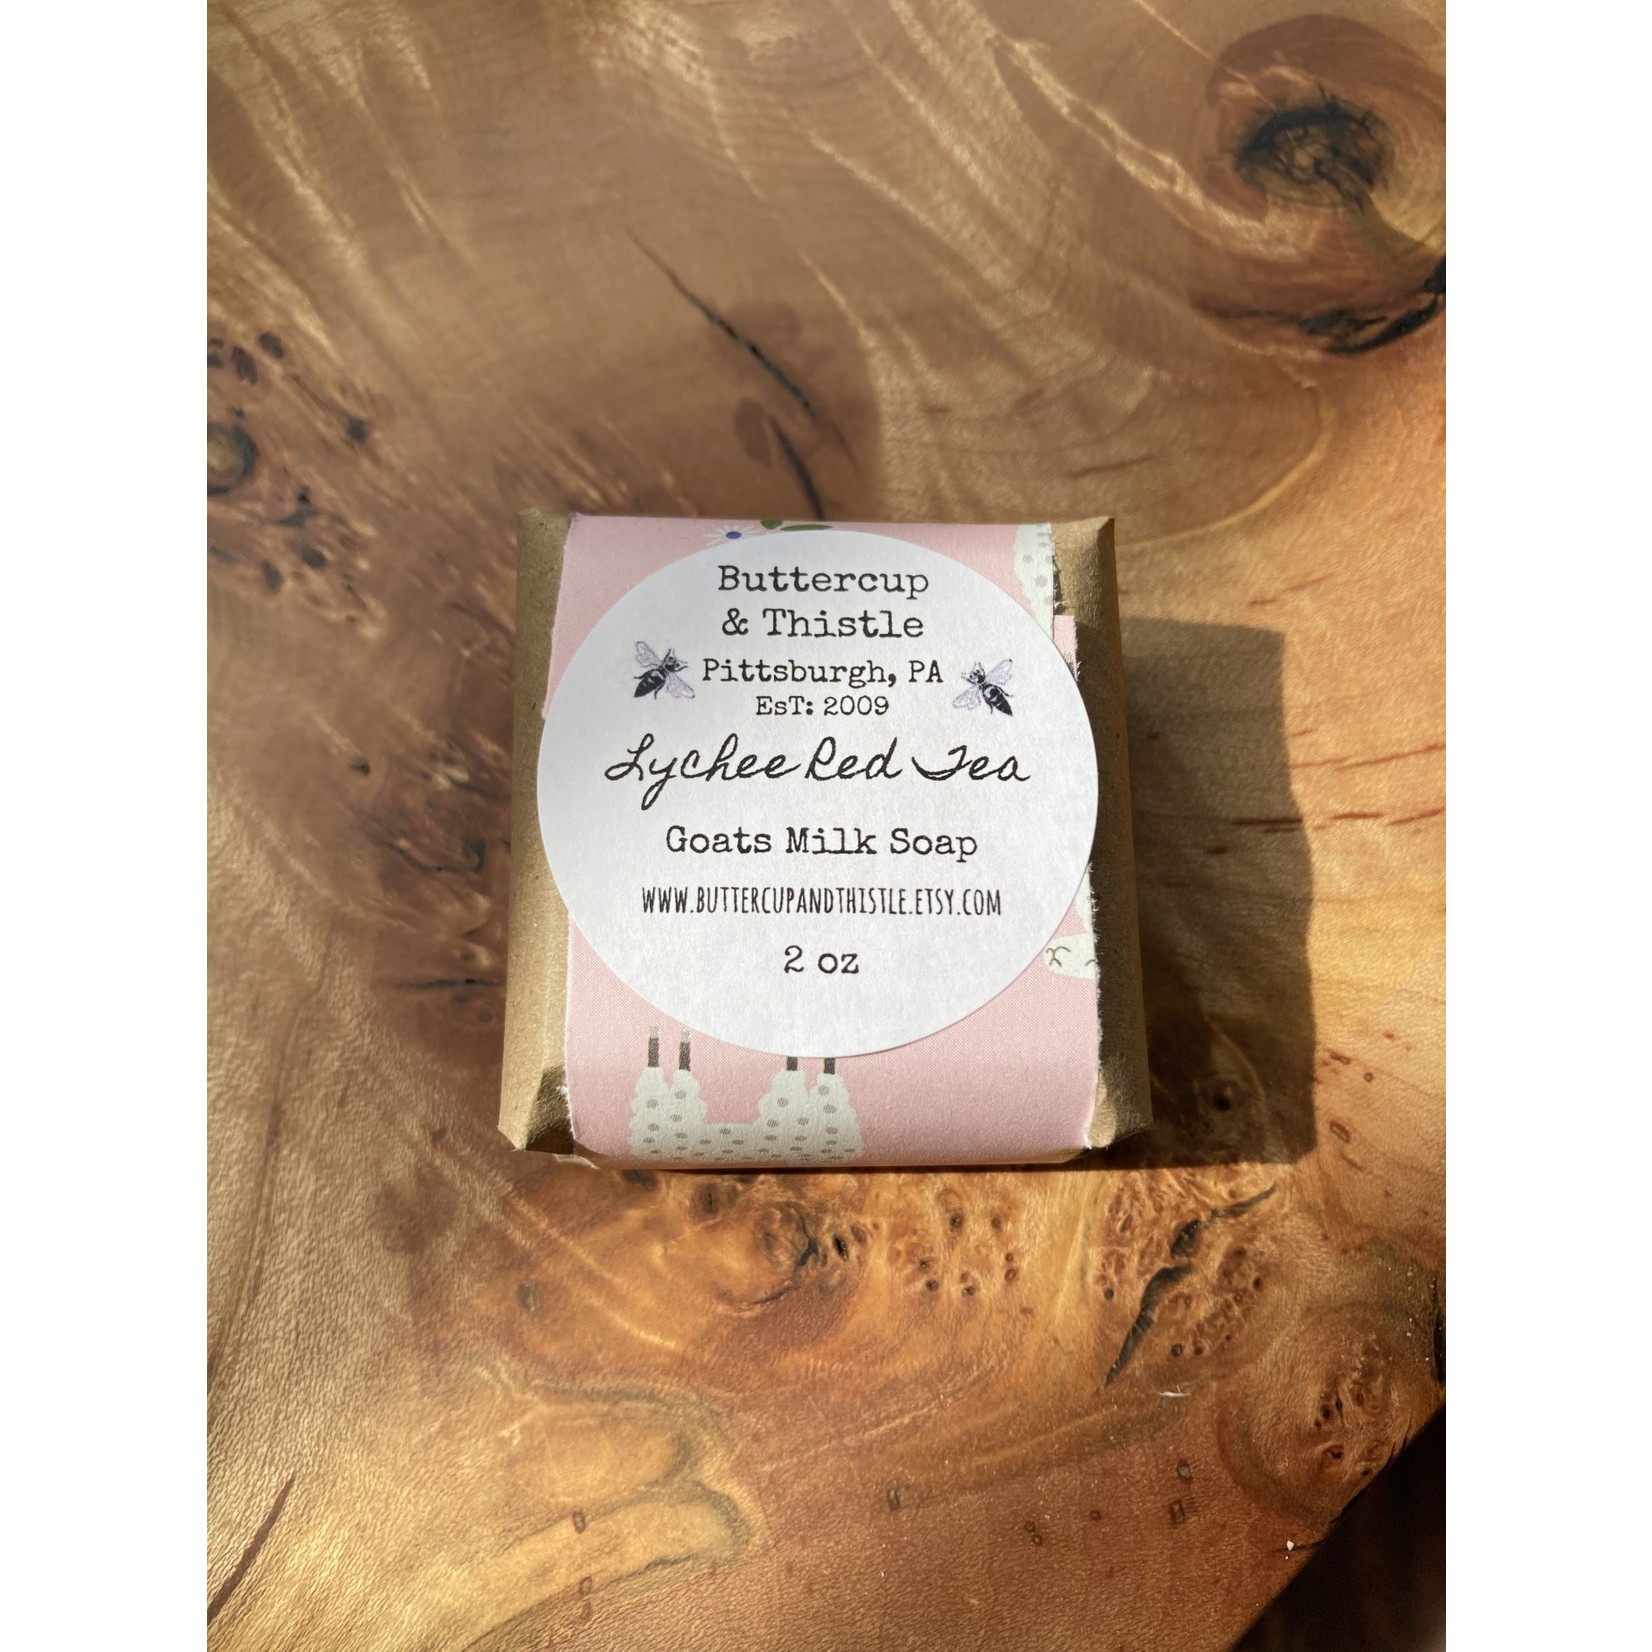 The Buttercup and Thistle Buttercup & Thistle Petite Soap l Lychee Red Tea